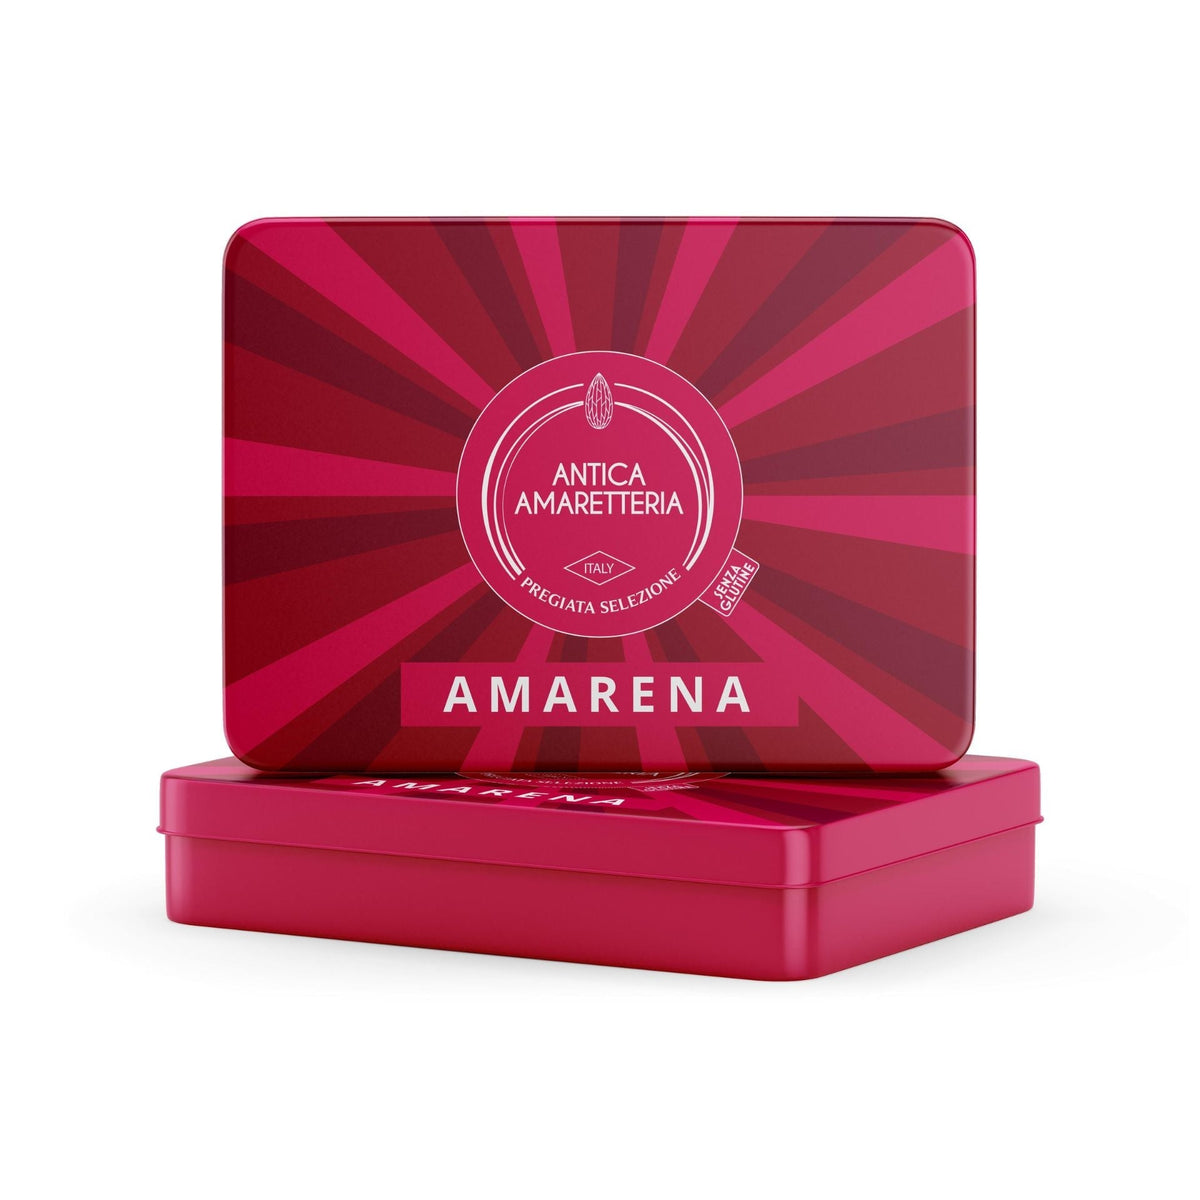 Antica Amaretteria Soft Amarena Cherry Amaretti 150g (Tin)  | Imported and distributed in the UK by Just Gourmet Foods